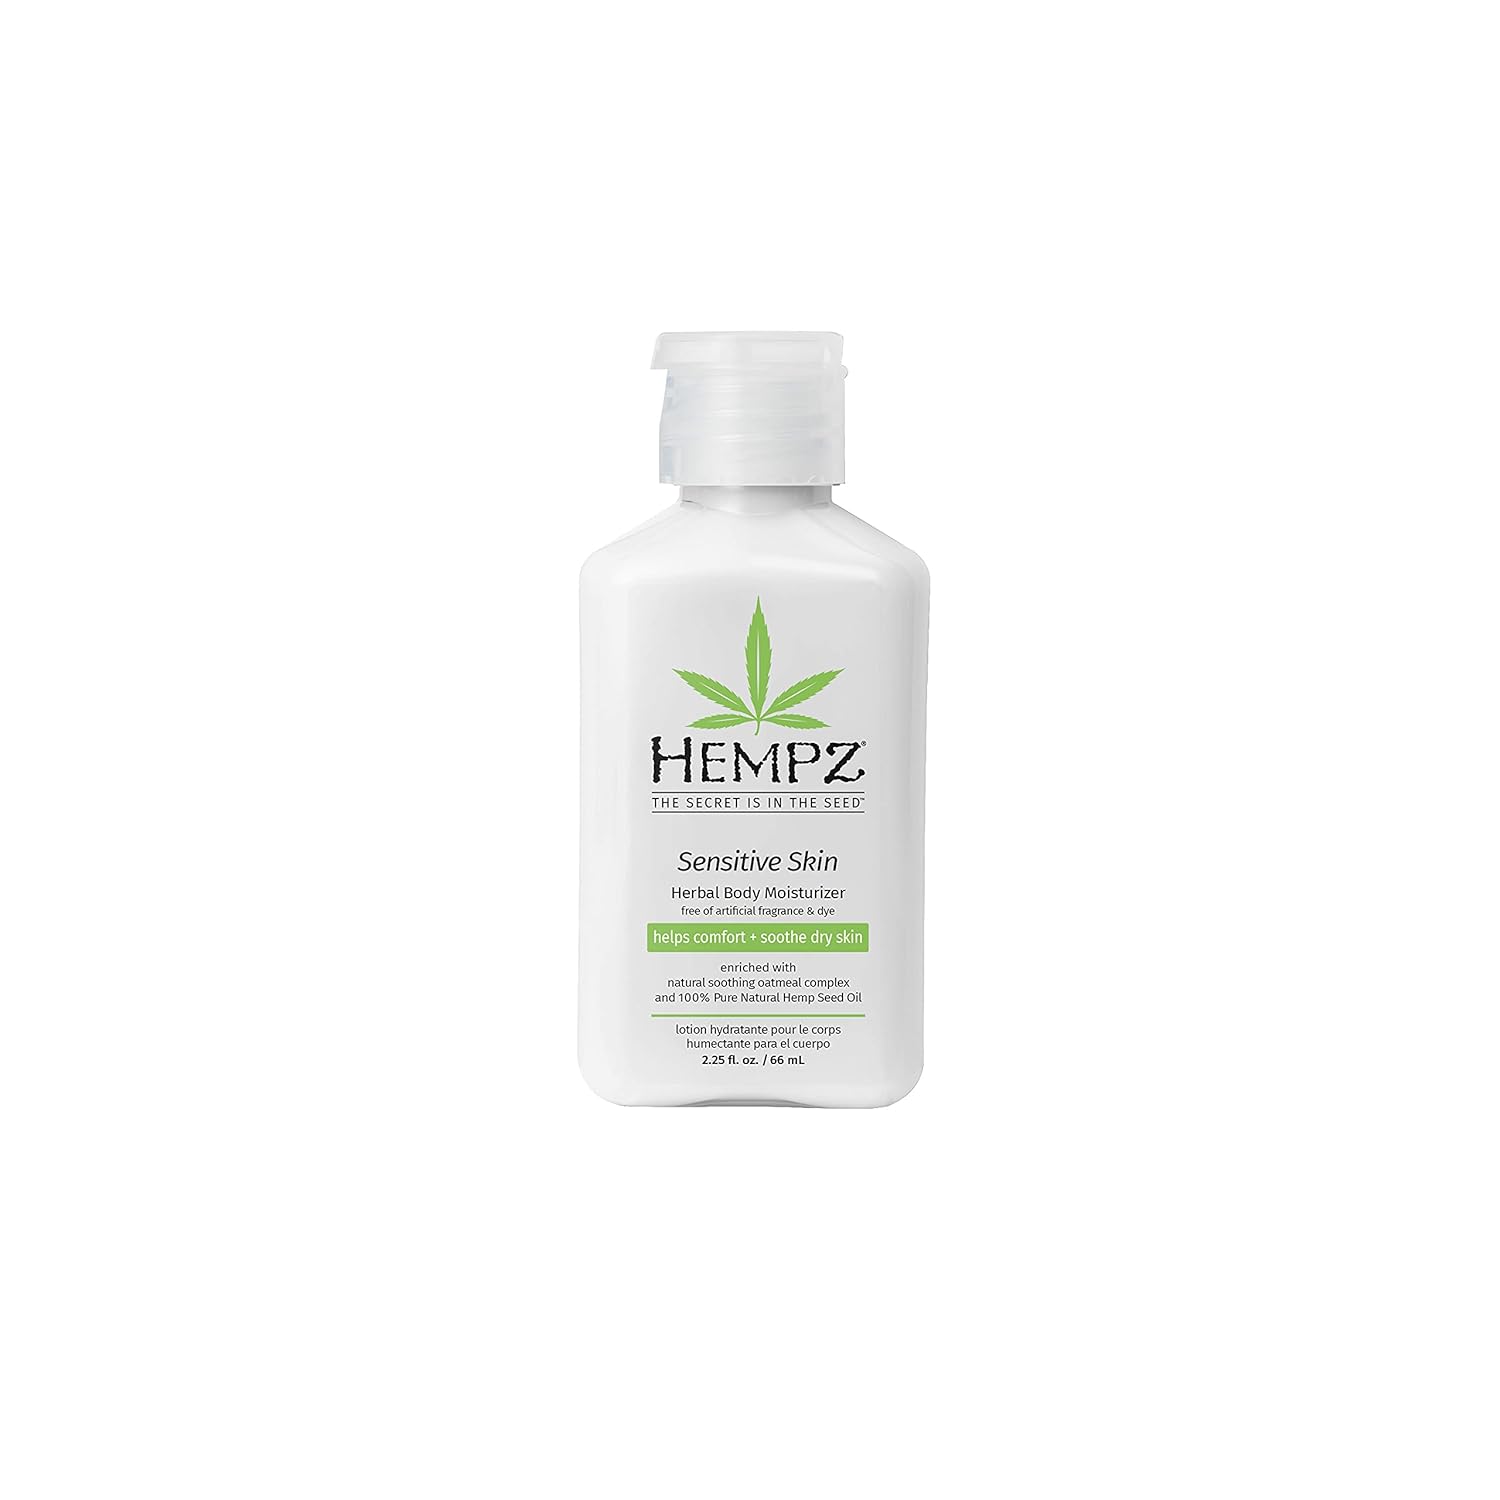 Hempz Sensitive Skin Herbal Body Moisturizer with Oatmeal, Shea Butter for Women and Men,2.25 oz. -Premium,Soothing Body Lotion with Hemp/ Cocoa /Mango Seed for Dry Skin -Skin Care Products